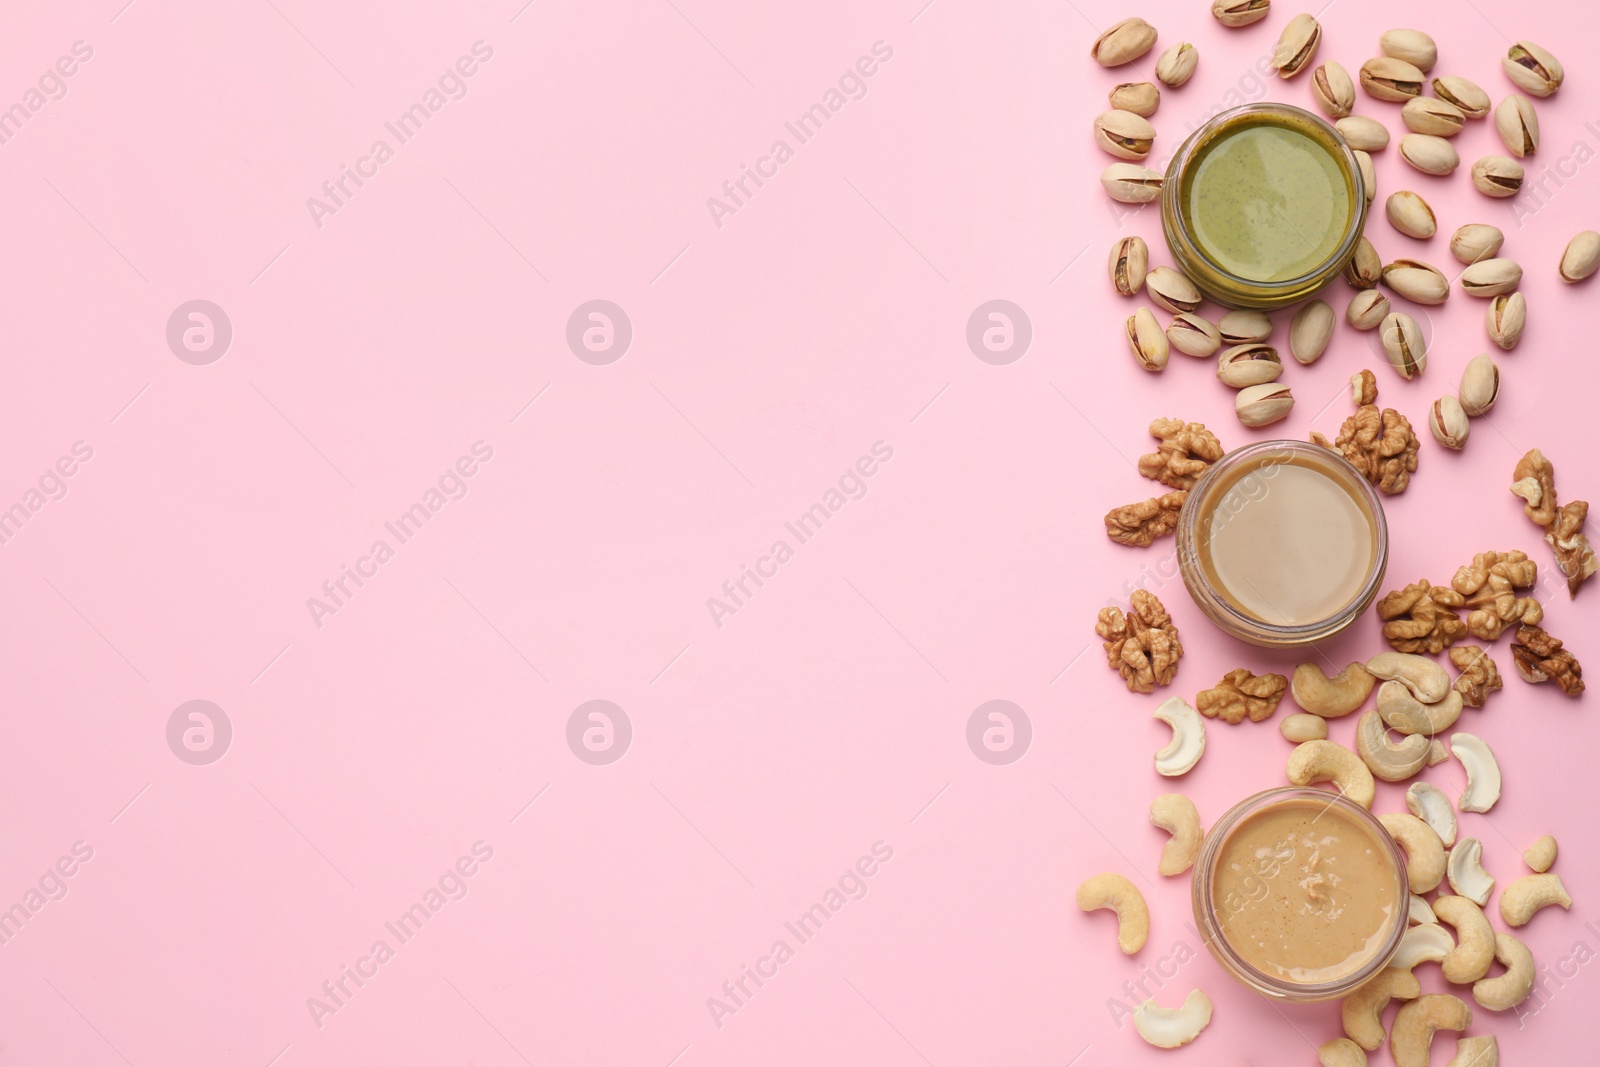 Photo of Different types of delicious nut butters and ingredients on pink background, flat lay. Space for text